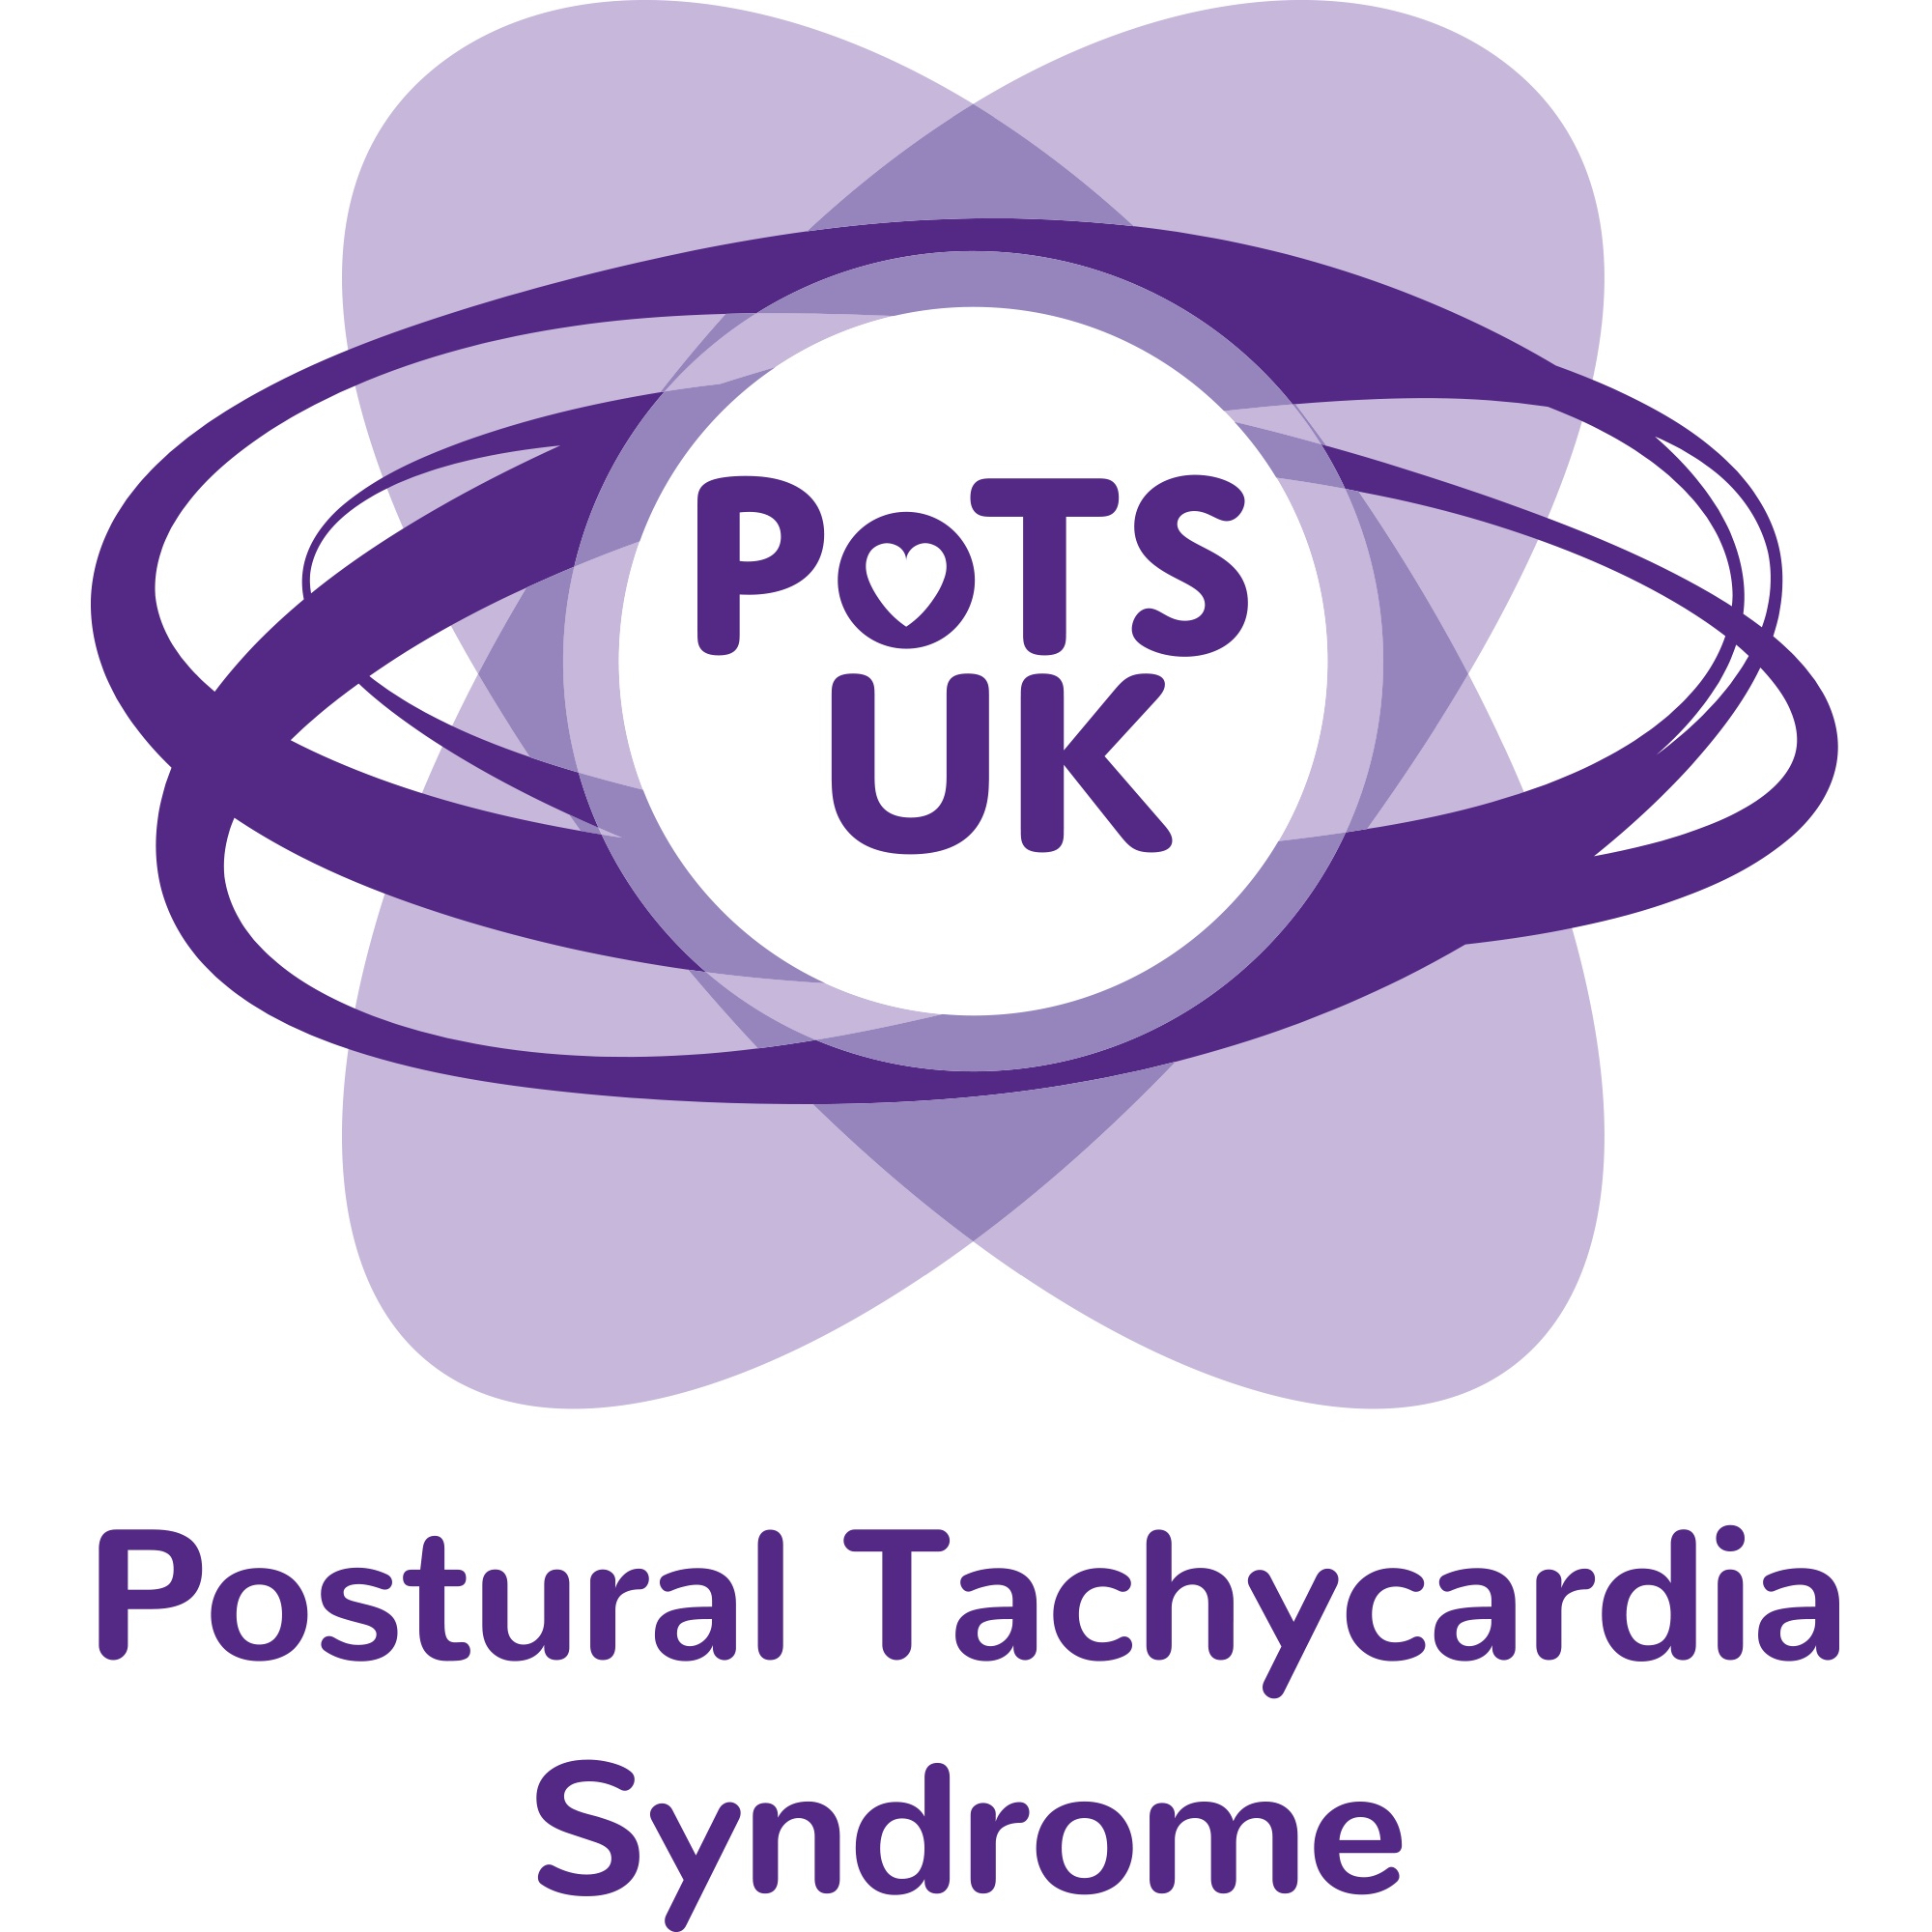 Postural Orthostatic Tachycardia Syndrome (PoTS) is an invisible